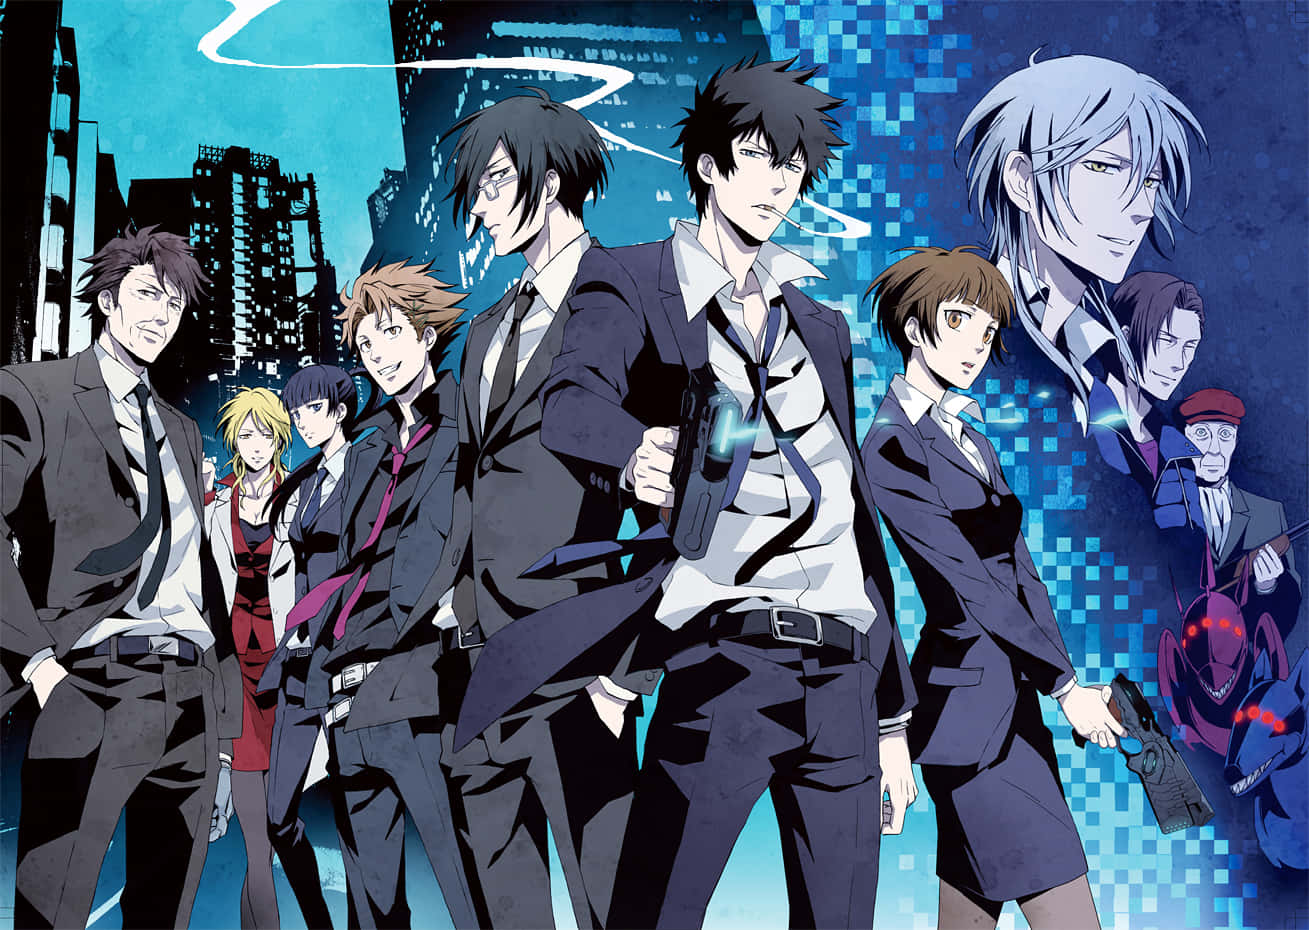 “The balance between justice and safety in Psycho Pass” Wallpaper